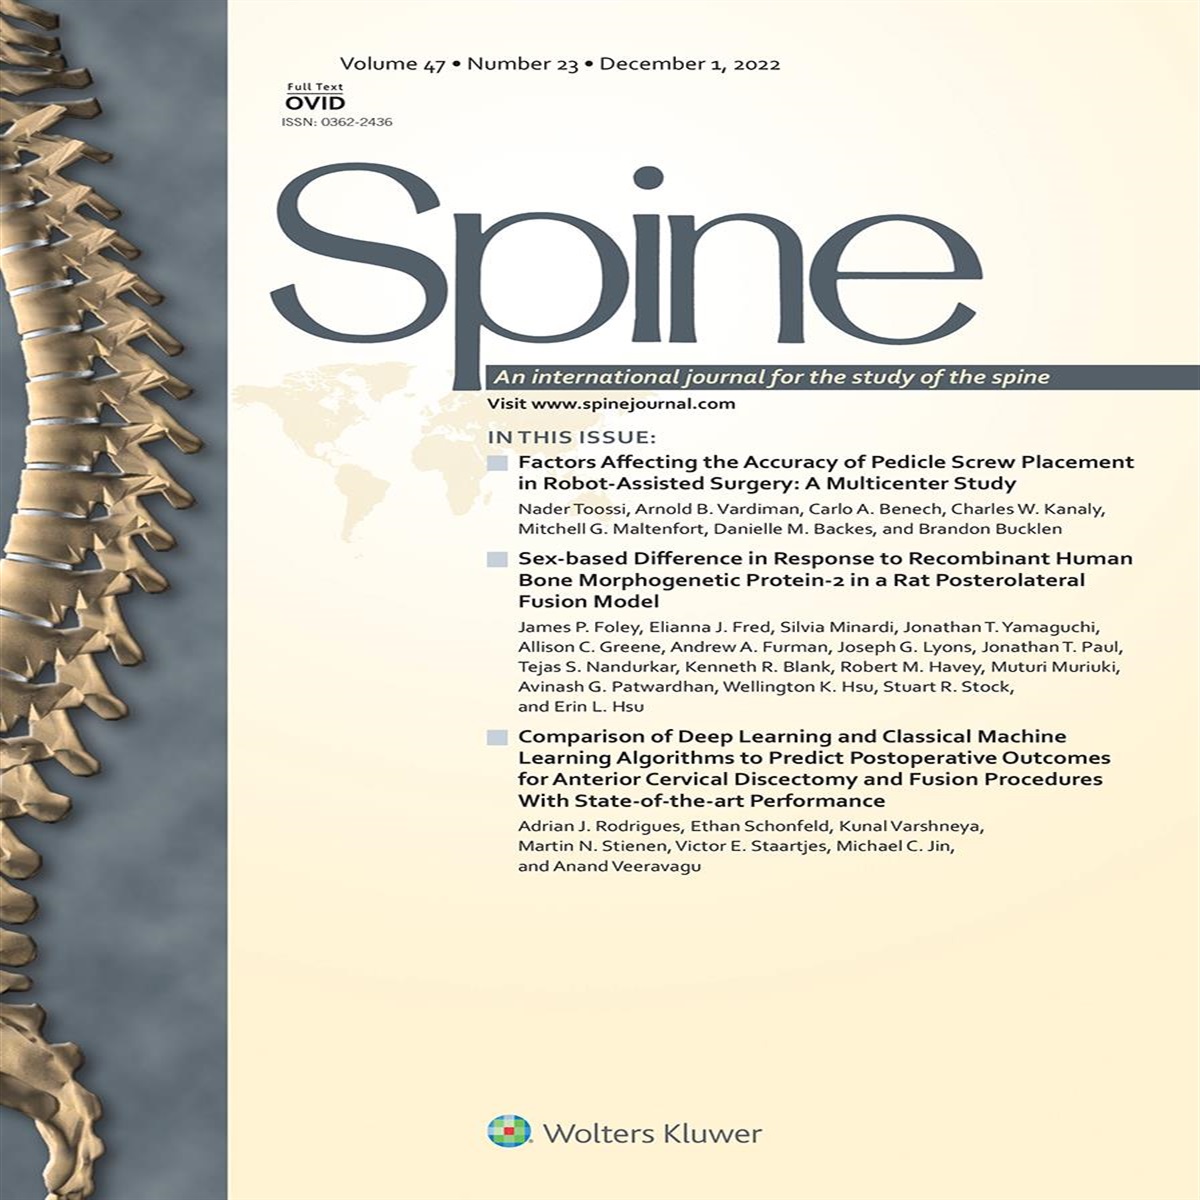 Decisional Regret Among Older Adults Undergoing Corrective Surgery for Adult Spinal Deformity: A Single Institutional Study: Erratum